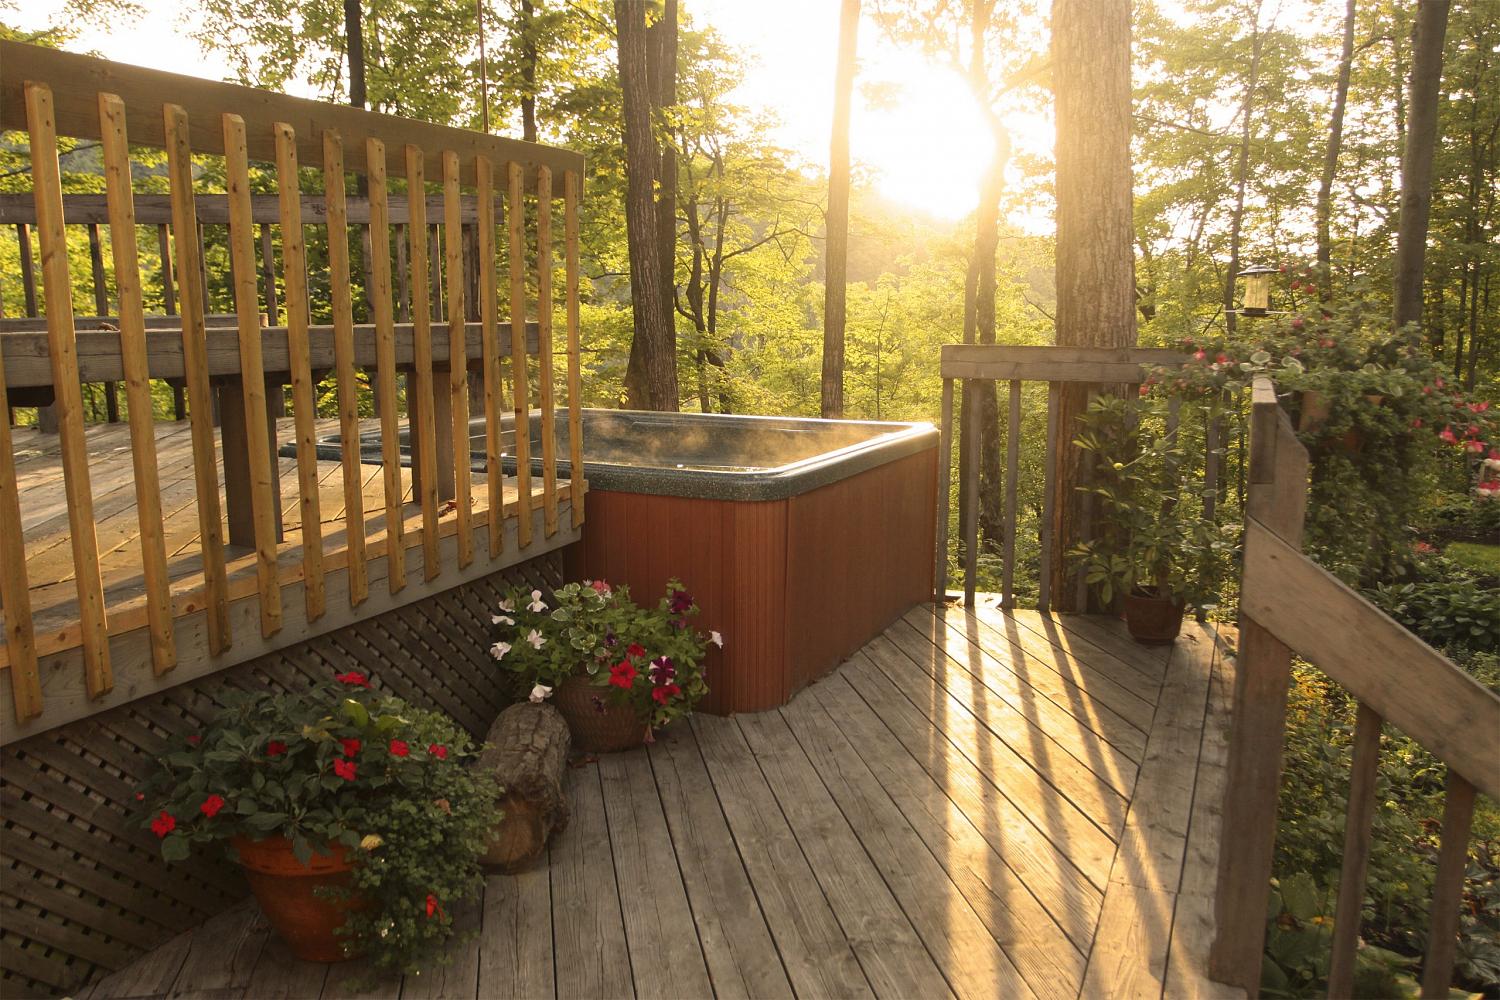 Surround your hot tub with a custom deck or patio